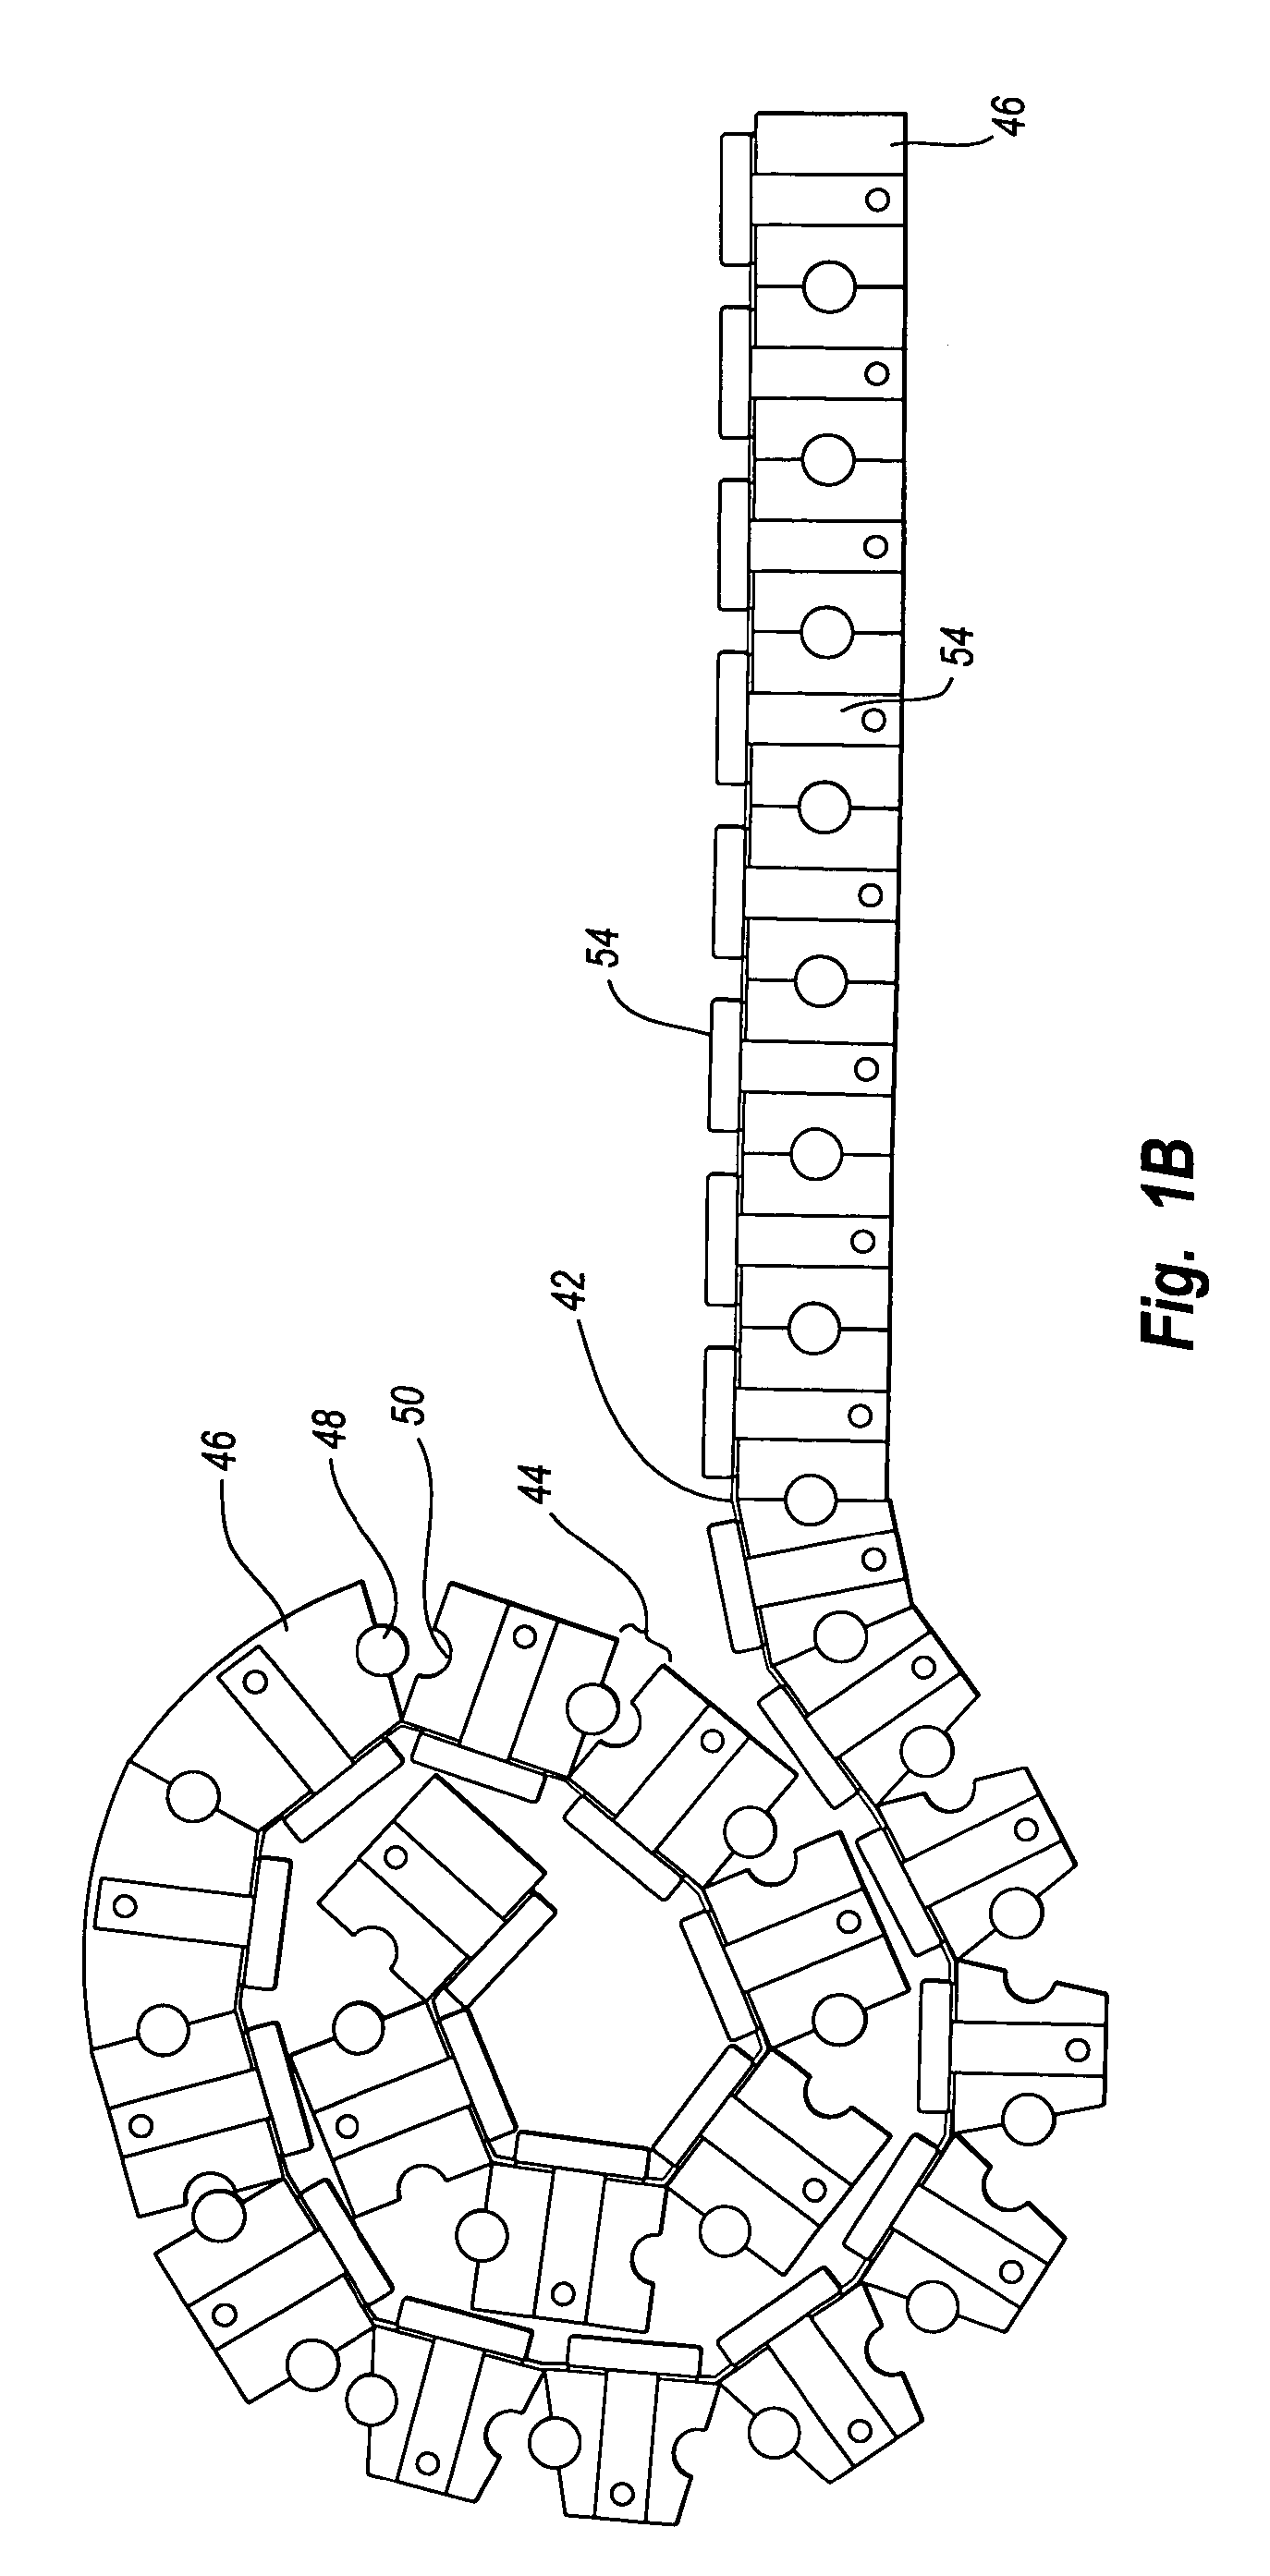 Rollable supporting device